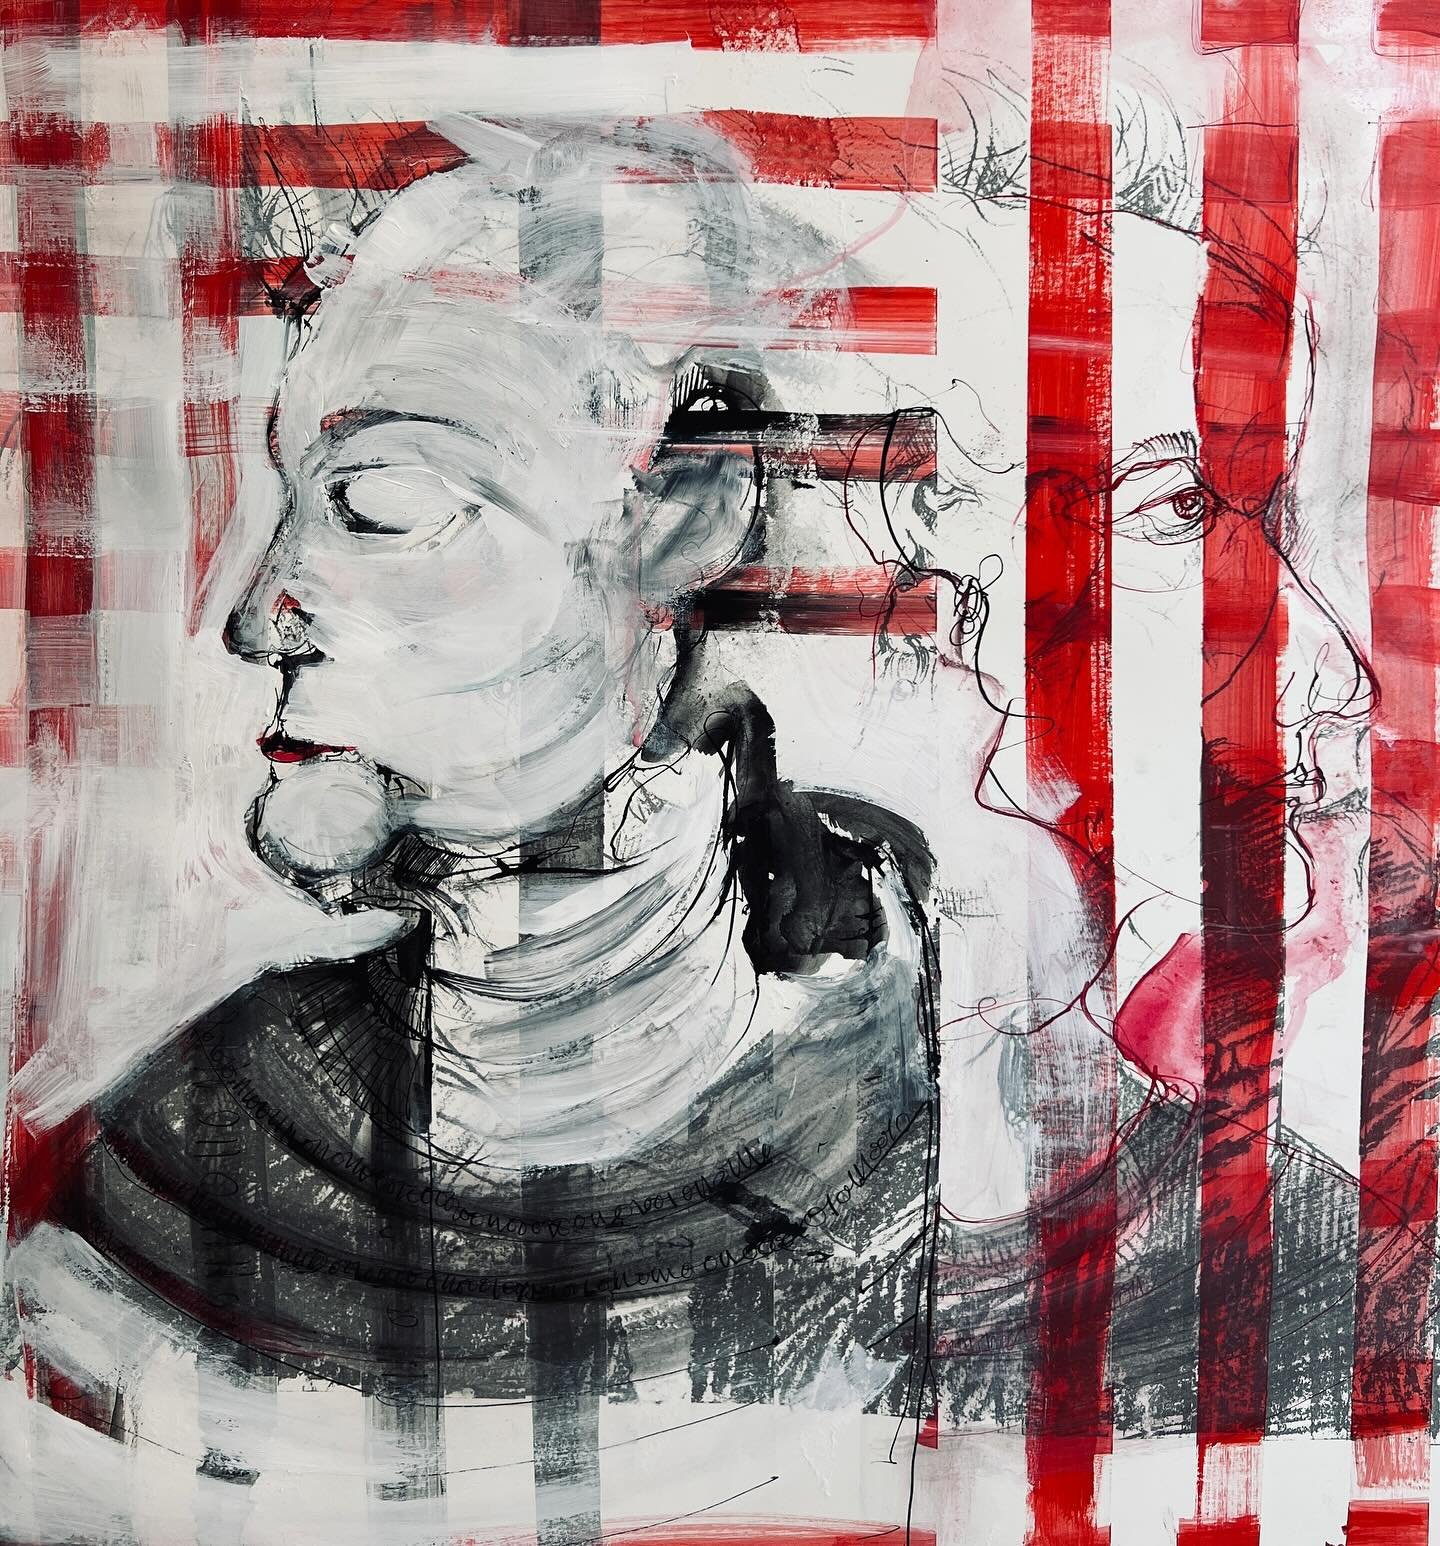 The strength of a drawing is the lines you cannot see. The decision of what not to draw being the most important. A reflection of what you show of oneself to the outside perhaps. Exploring the space between the binary. Painting/drawing into a screen 